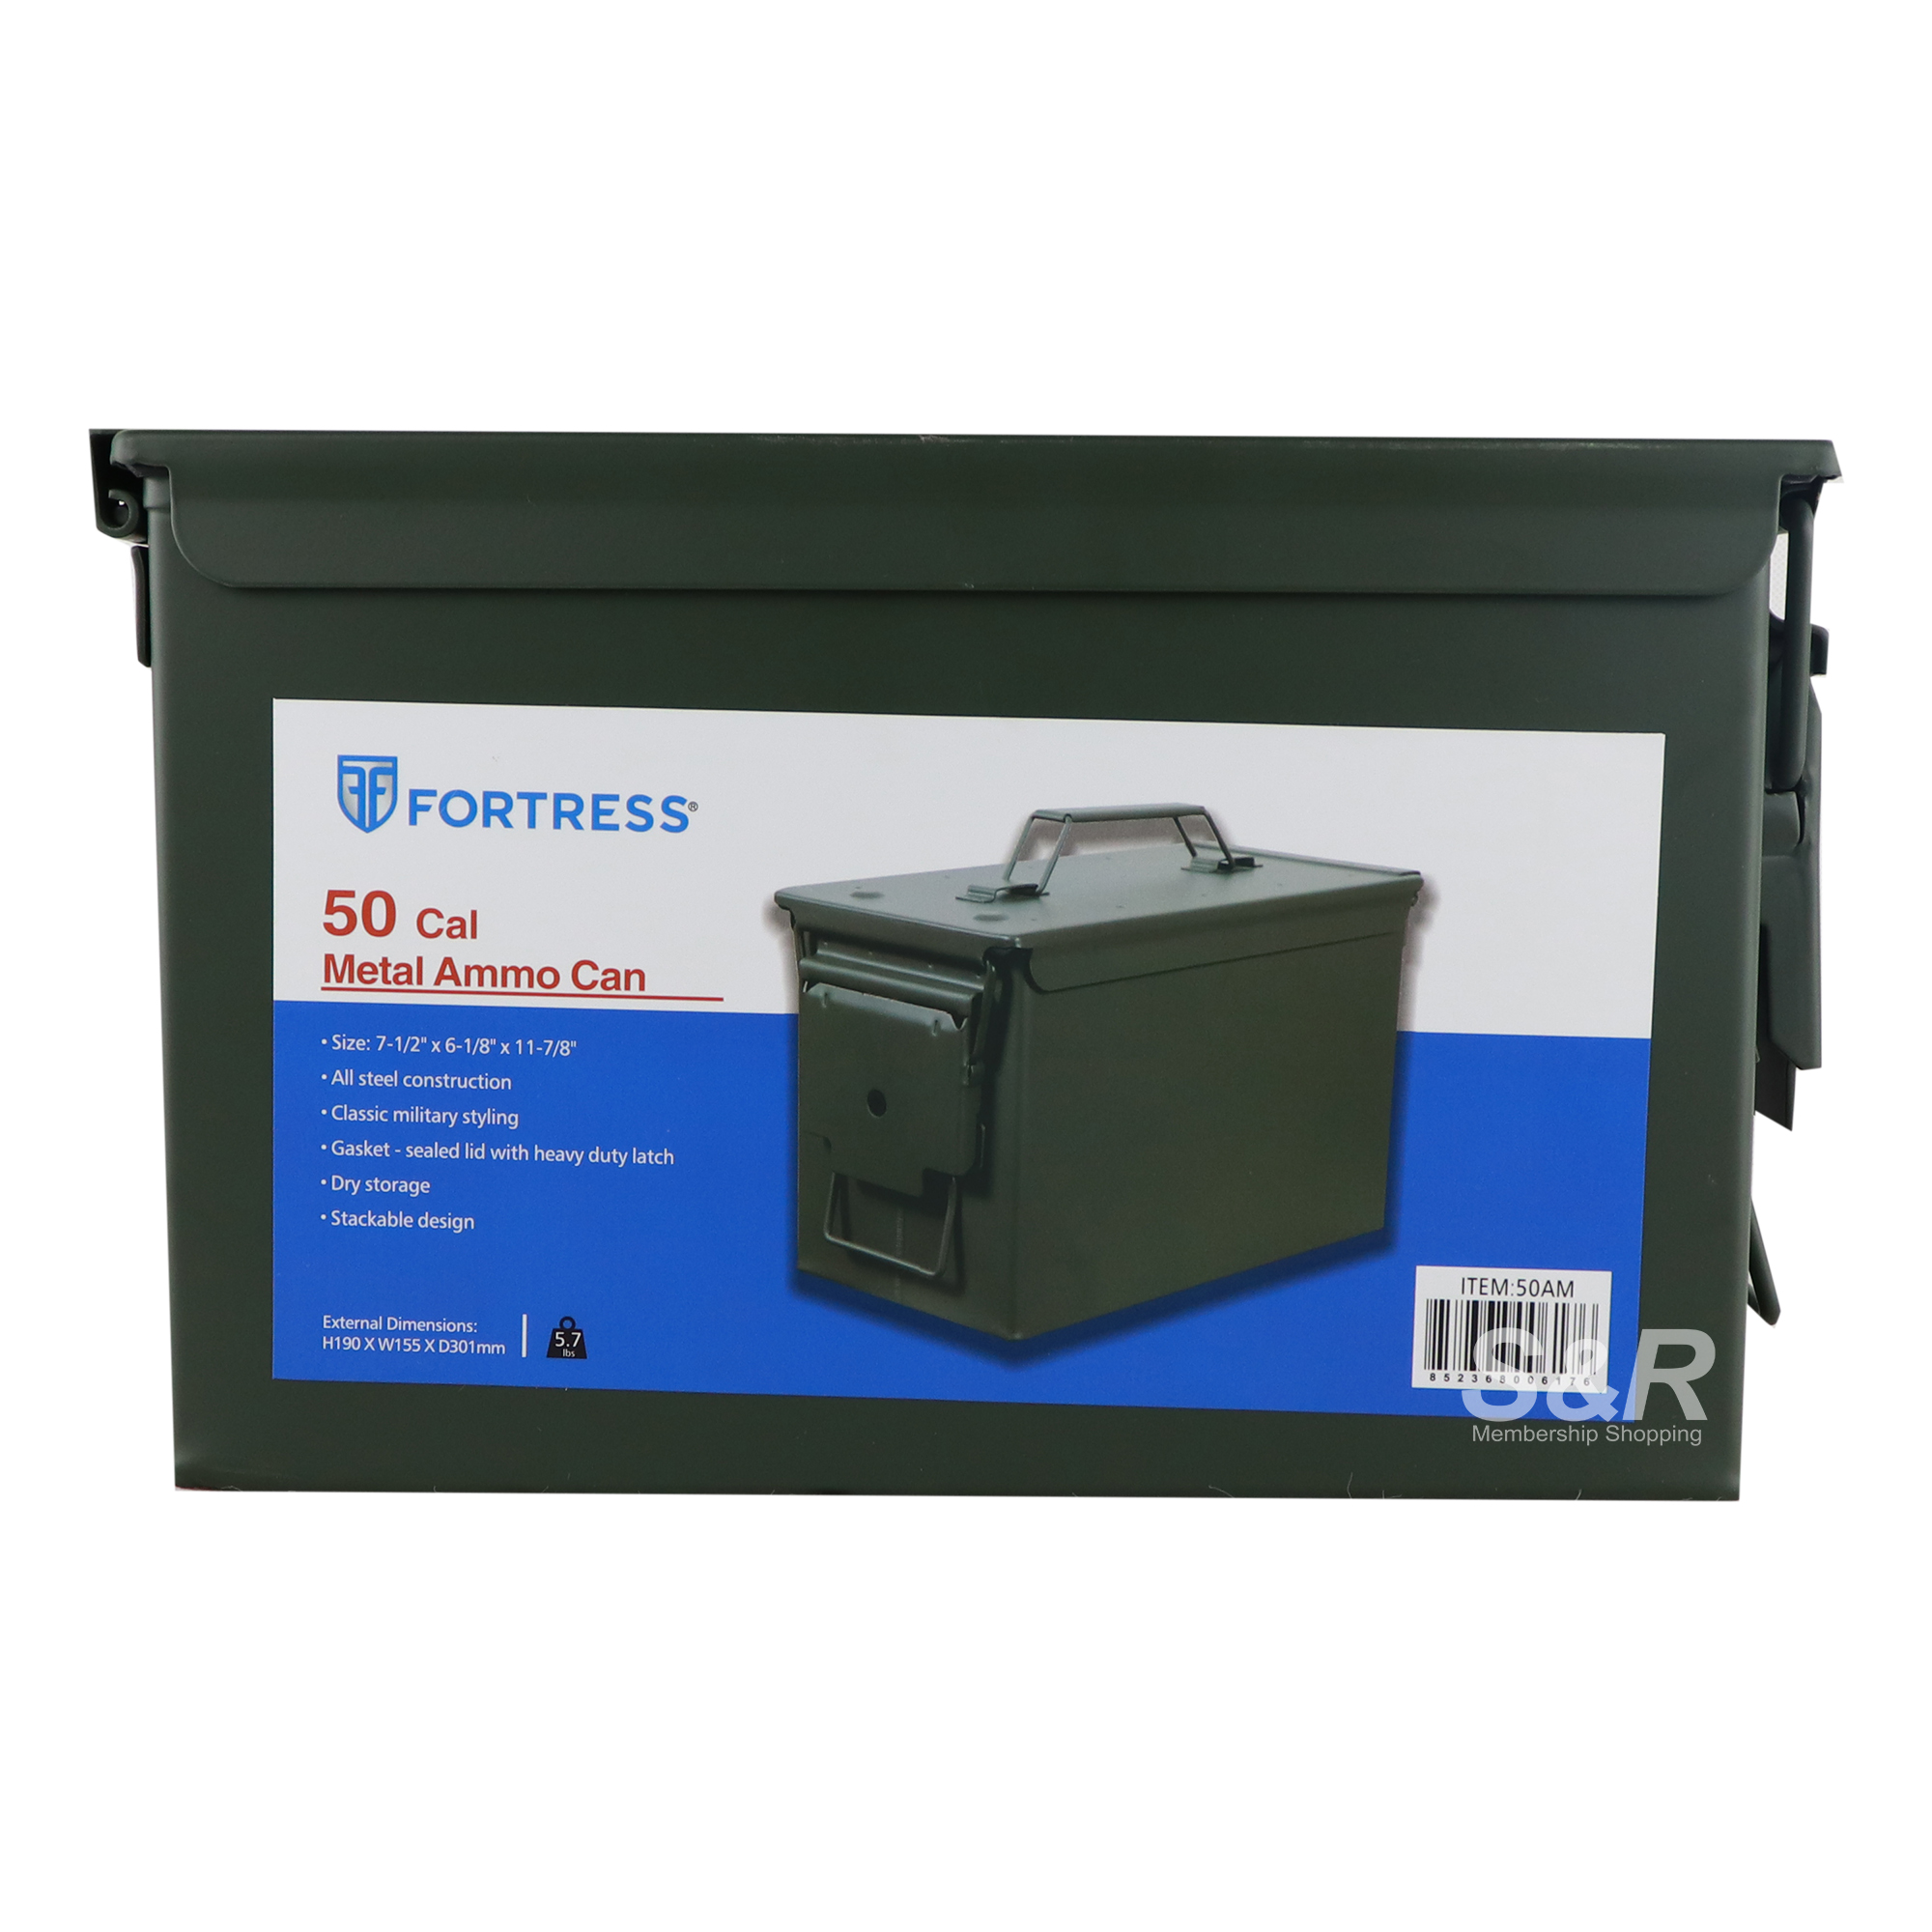 Fortress 50 Caliber Metal Ammo Can 1pc